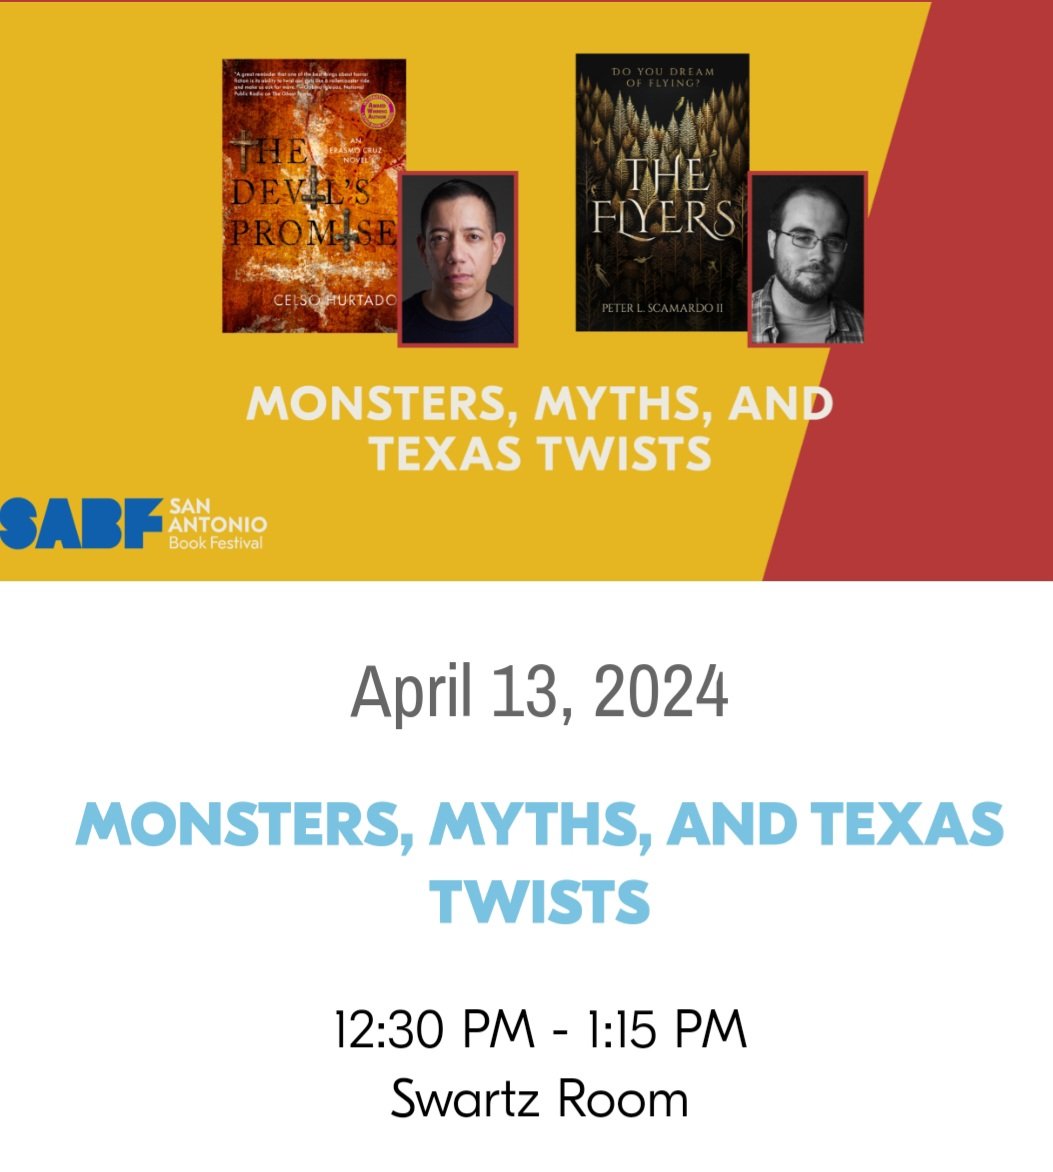 If you're attending The San Antonio Book Festival next month, I'll be discussing The Devil's Promise at 12:30. @PLScamardo2 is on the panel as well, discussing his new book The Flyers. Hope to see you there!